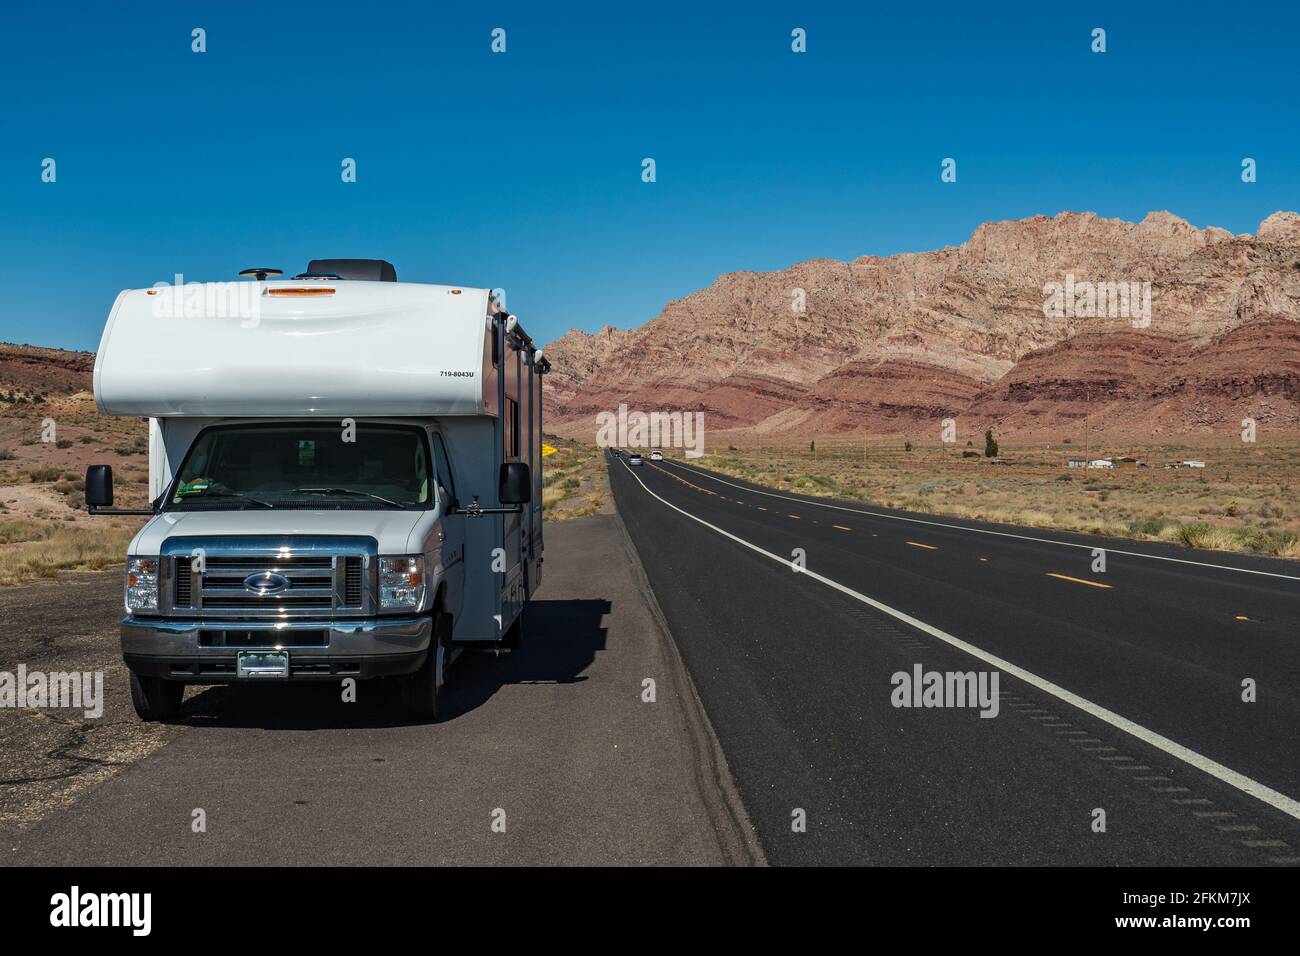 C-type camper with slideouts standing in the desert on the side of the road with mountains in the background and a highway passing Stock Photo